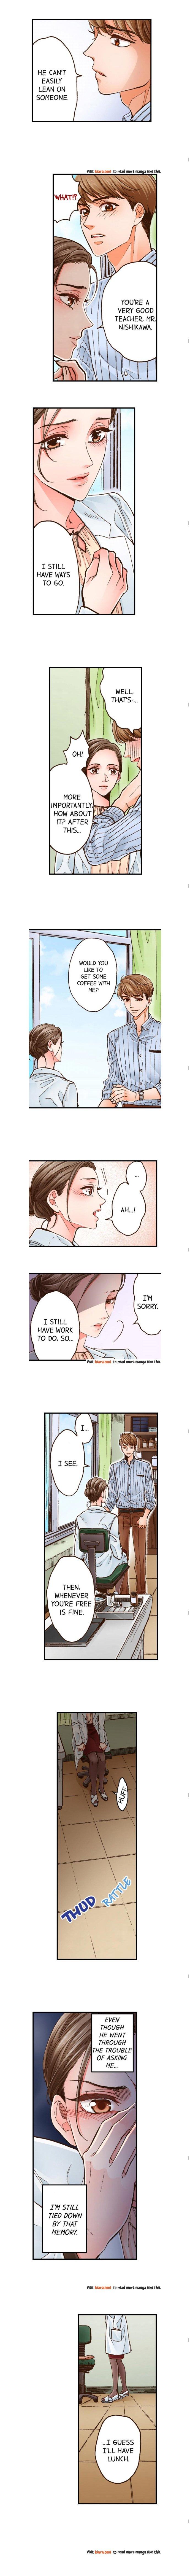 Yanagihara Is a Sex Addict - Chapter 1 Page 3